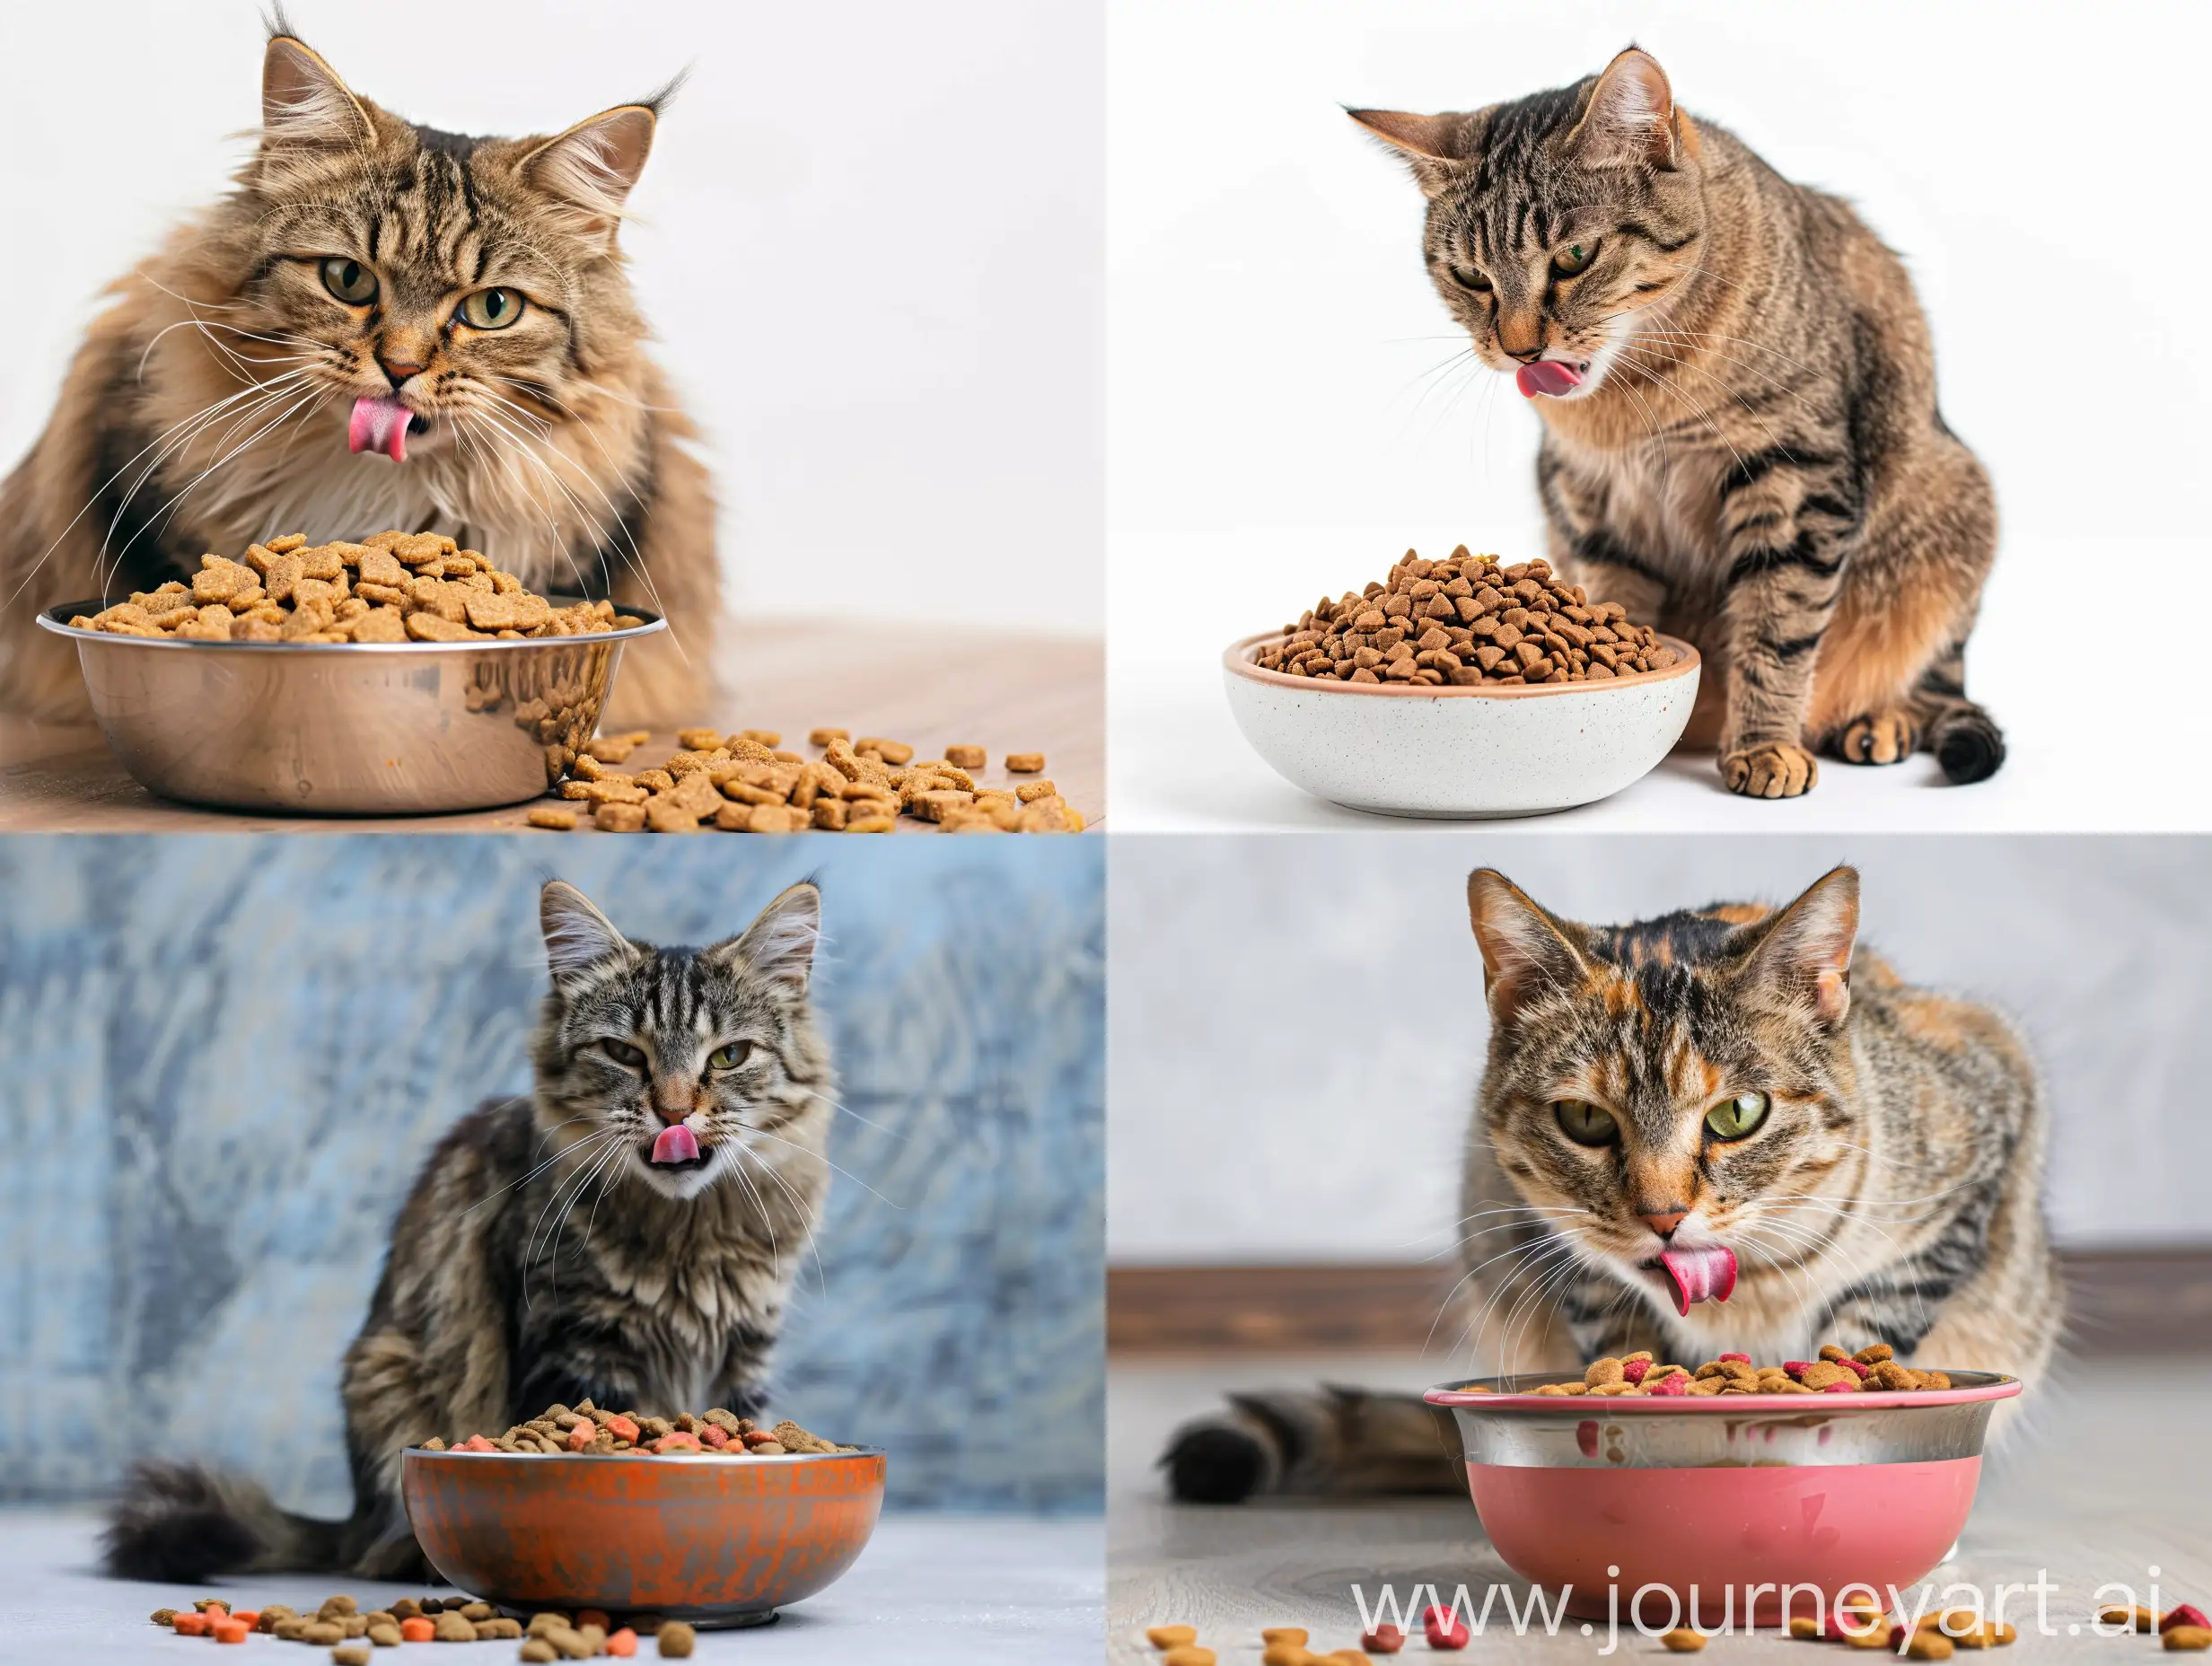 Overweight adult cat sitting with a large overflowing bowl of dry food while licking its lips